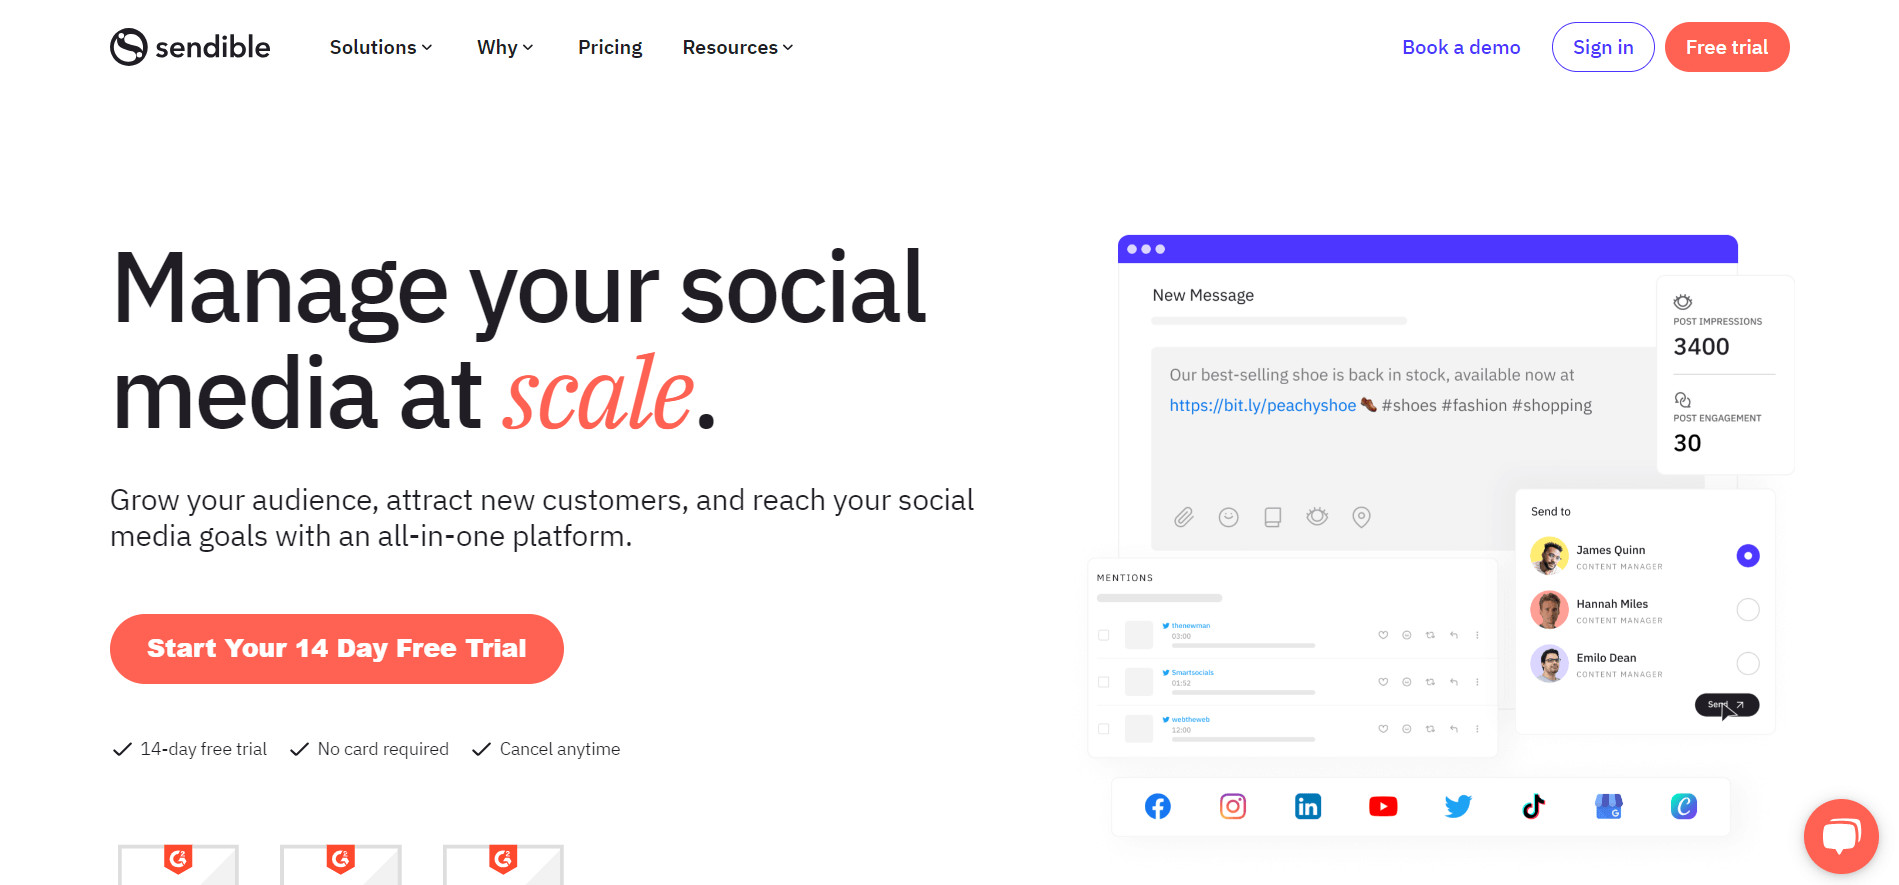 Sendible homepage with product's dashboard and a new message composer, various social network icons, reports and options for personal sending, including headline "Manage your social media at scale".